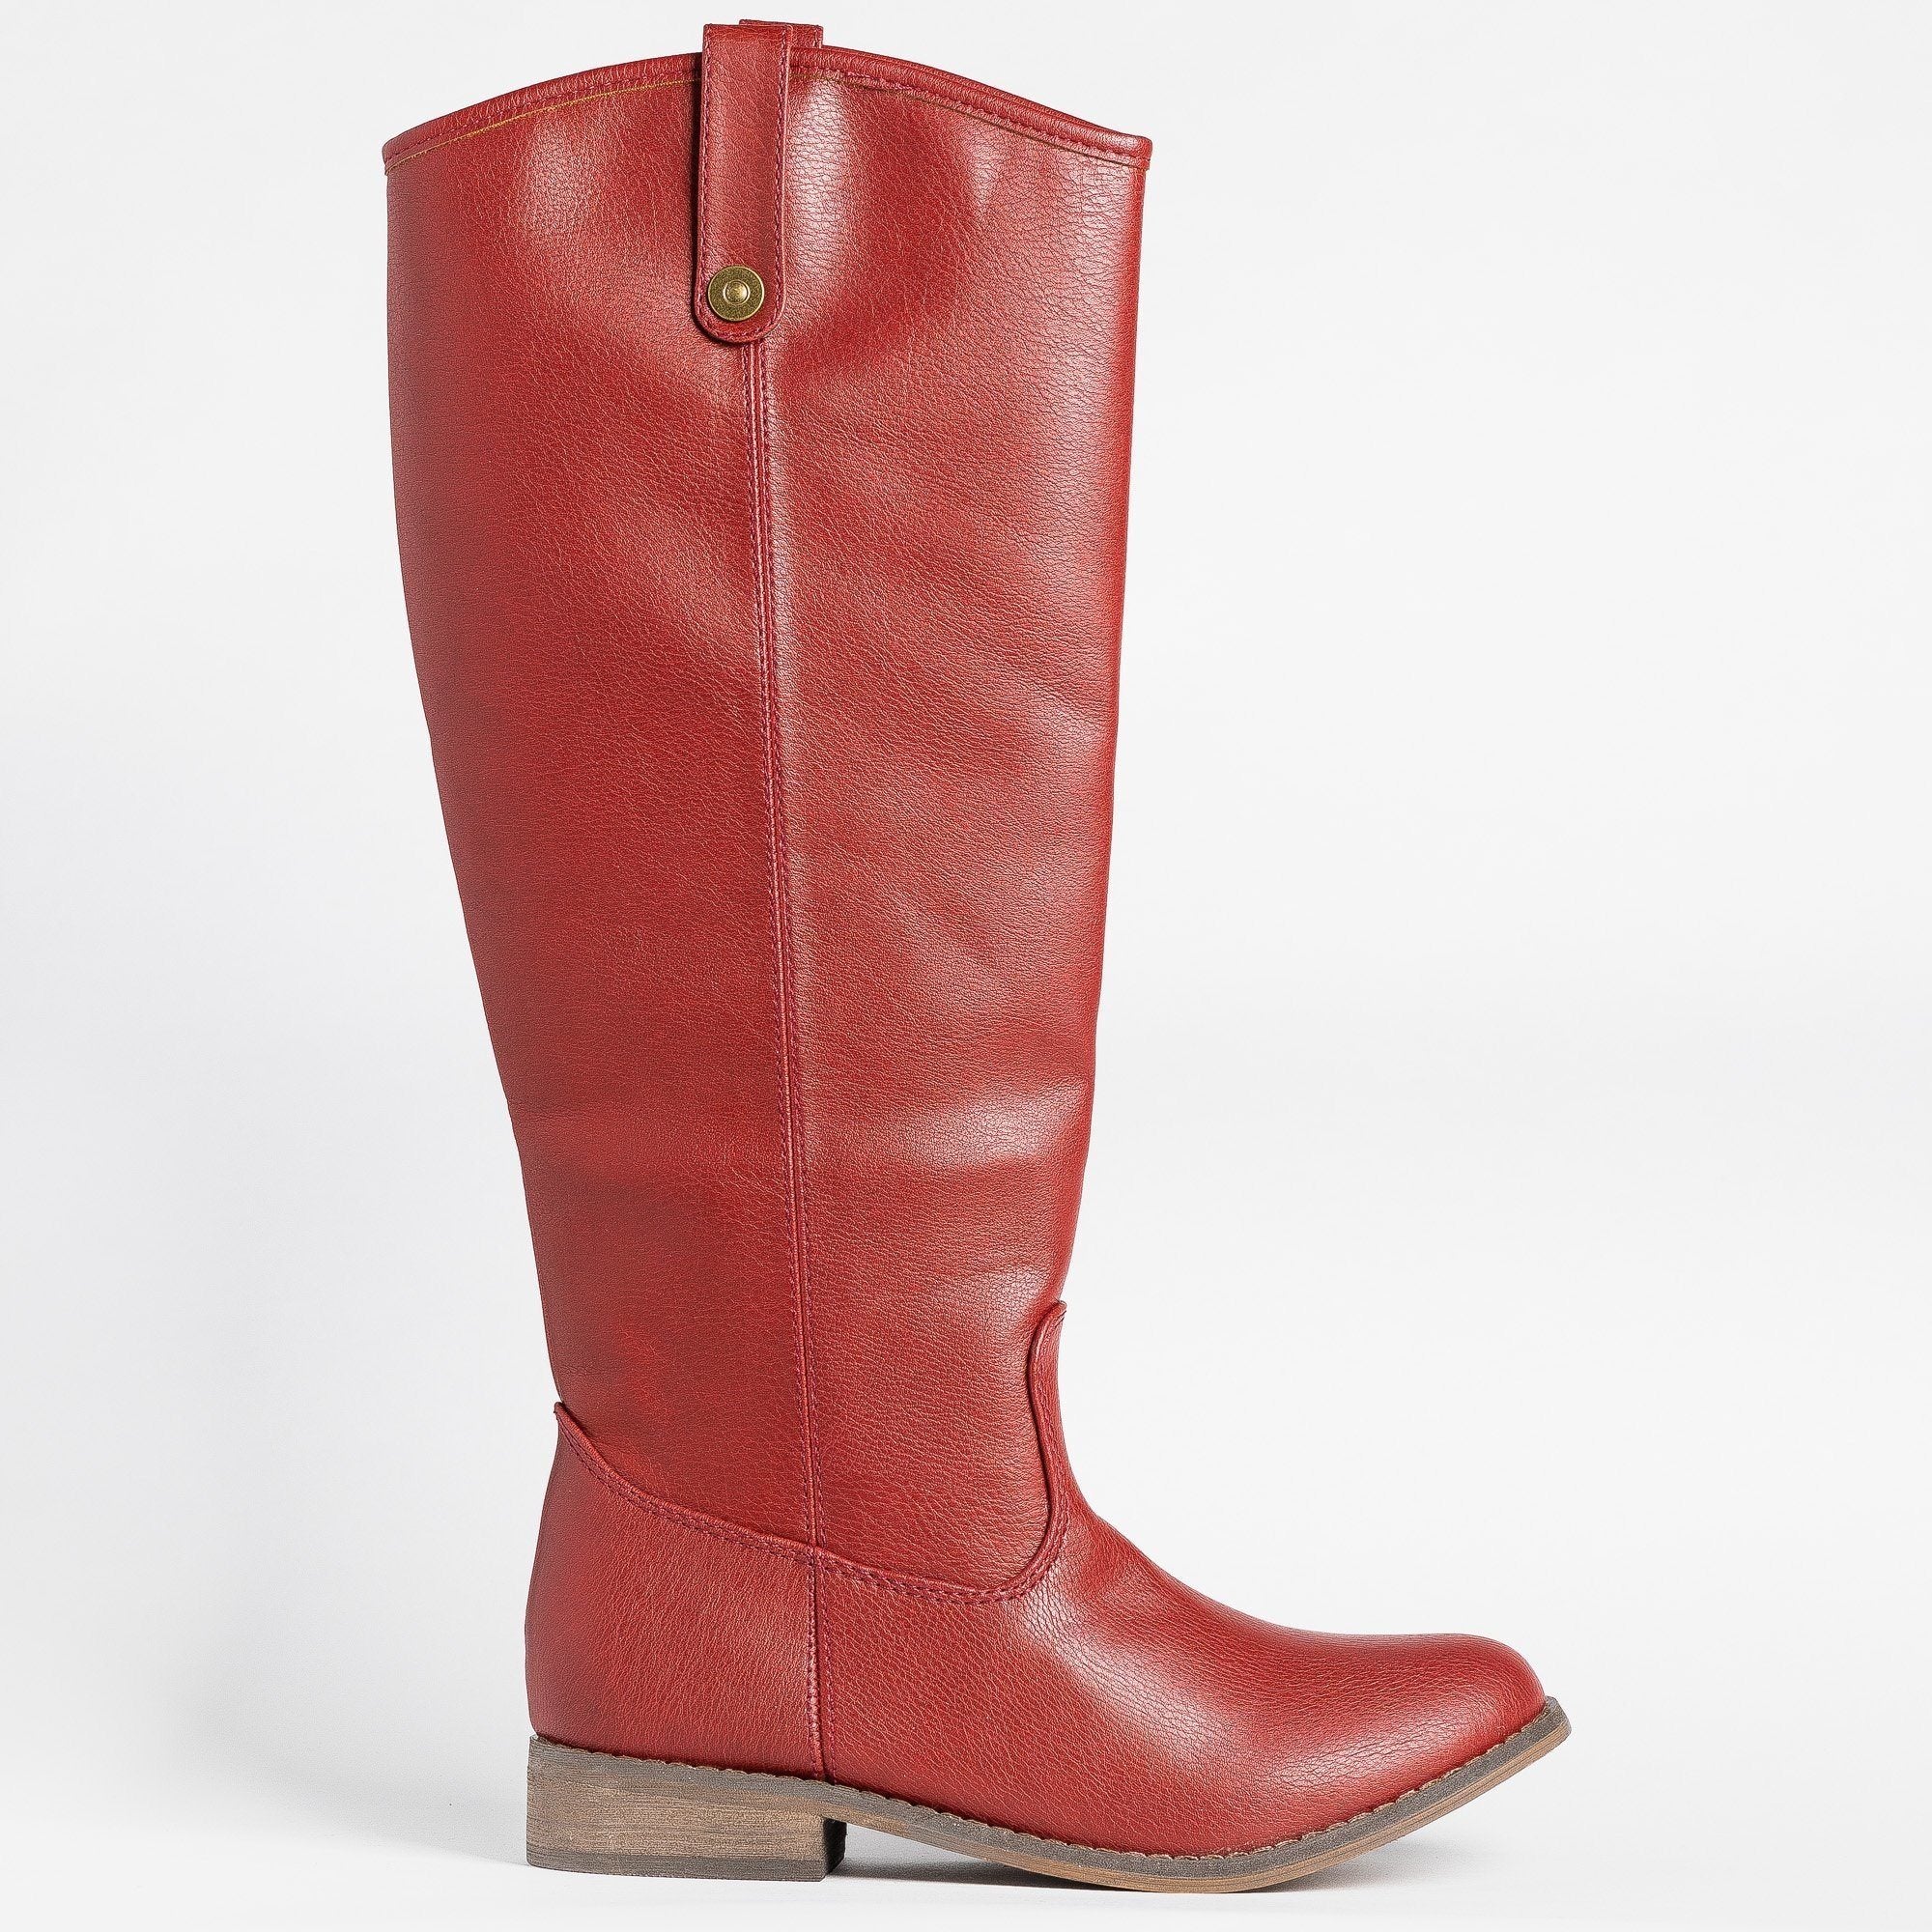 Tall Faux Leather Boots - Breckelle's 